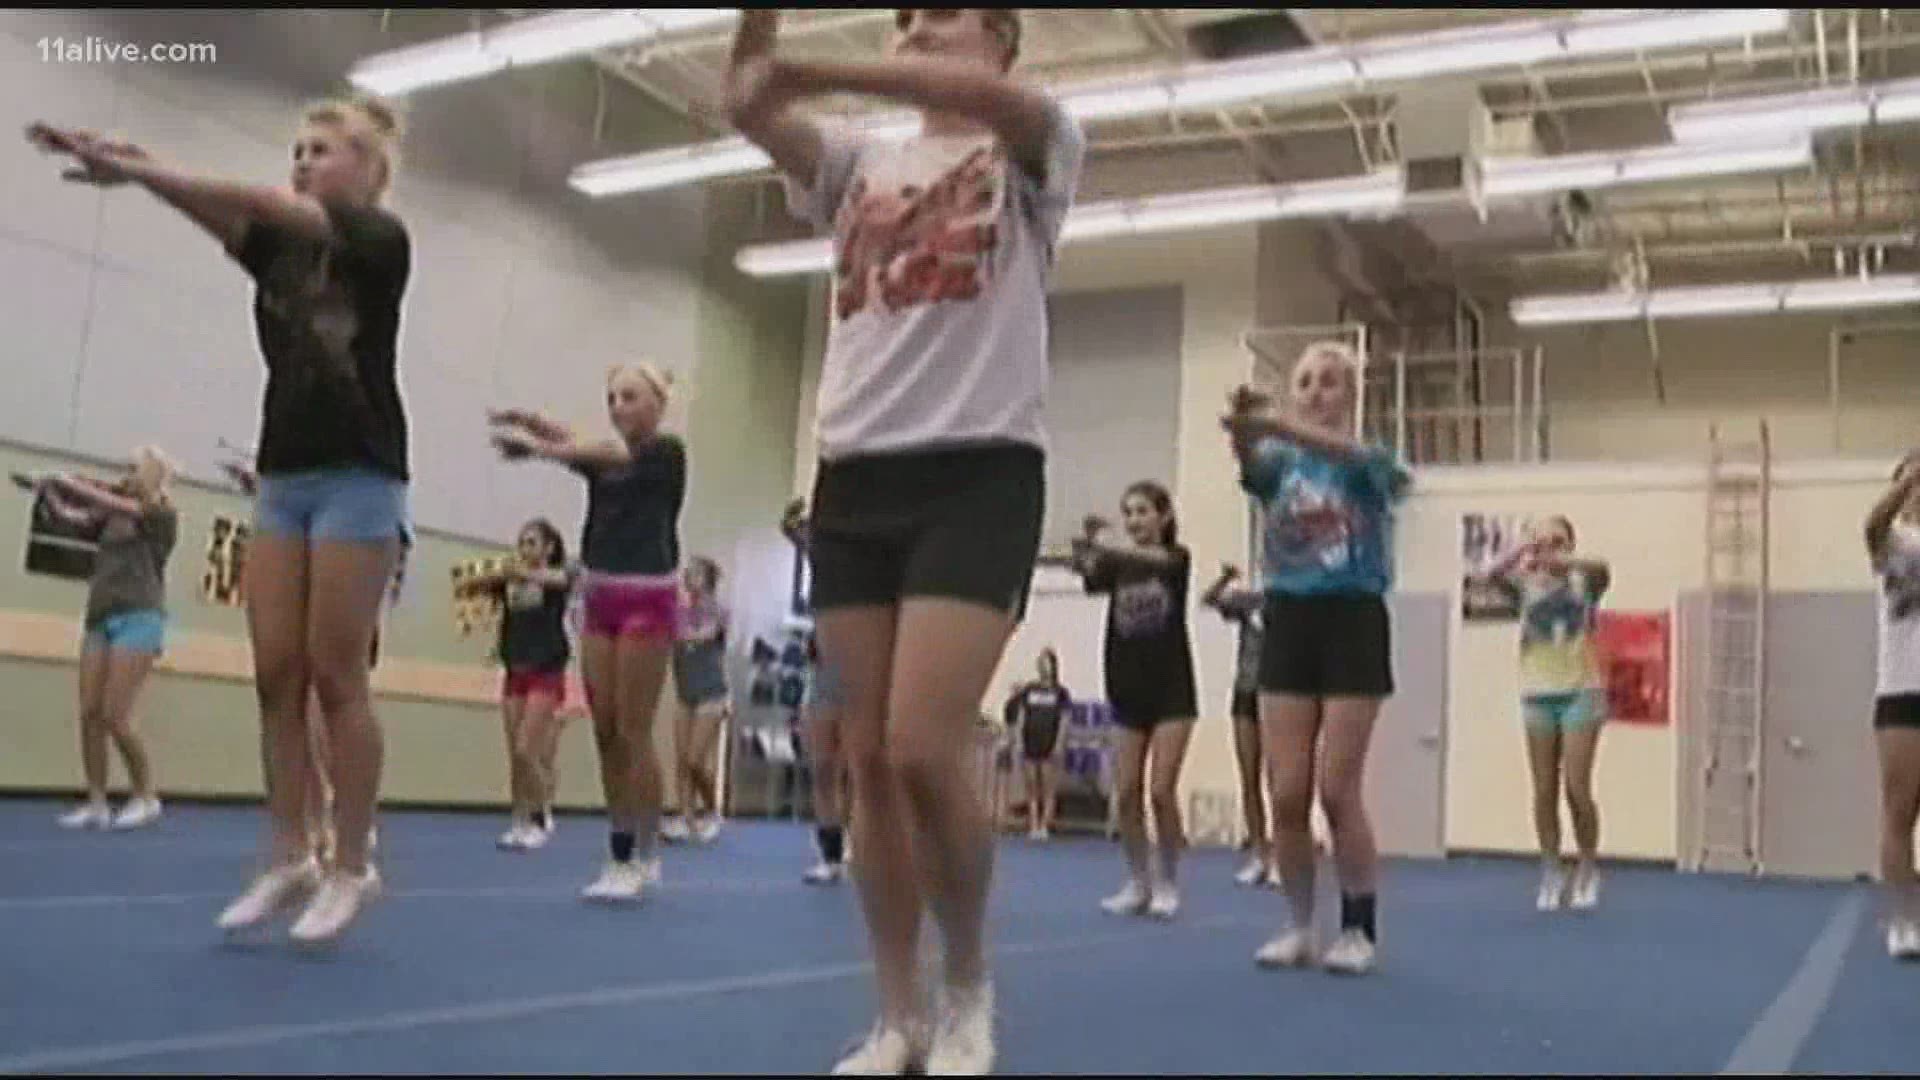 Organizers of the annual CheerSport Nationals are keeping teams apart and holding the competitions in near-isolation venues with only a few family members allowed.